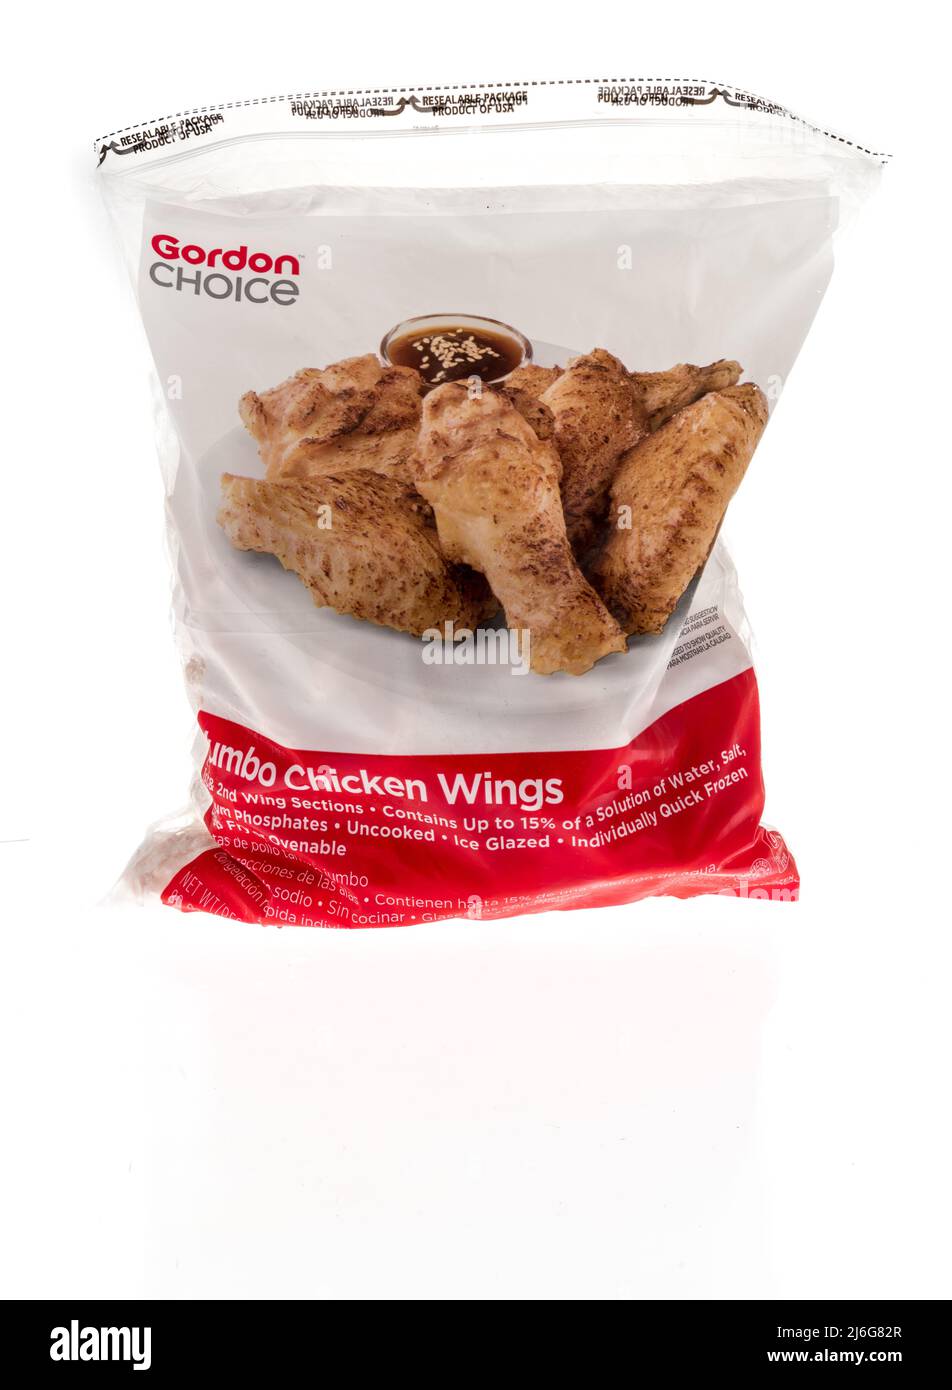 Winneconne, WI -23 April 2022: A package of Gordon choice chicken buffalo wings on an isolated background Stock Photo